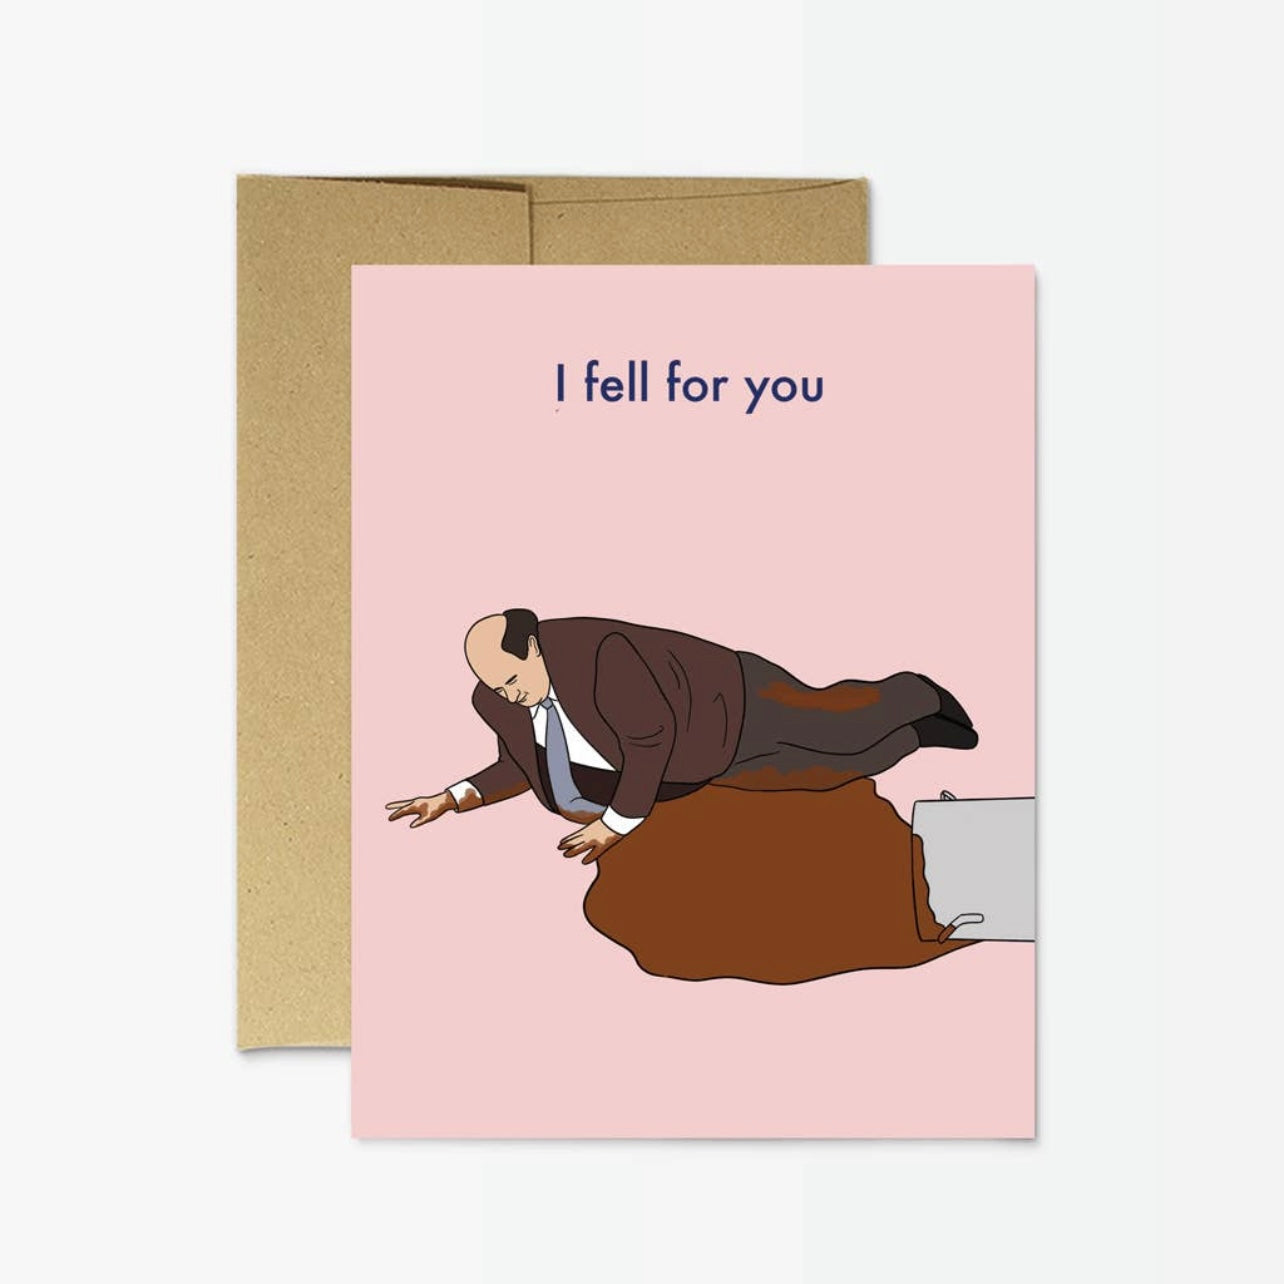 Kevin Fell for You Card